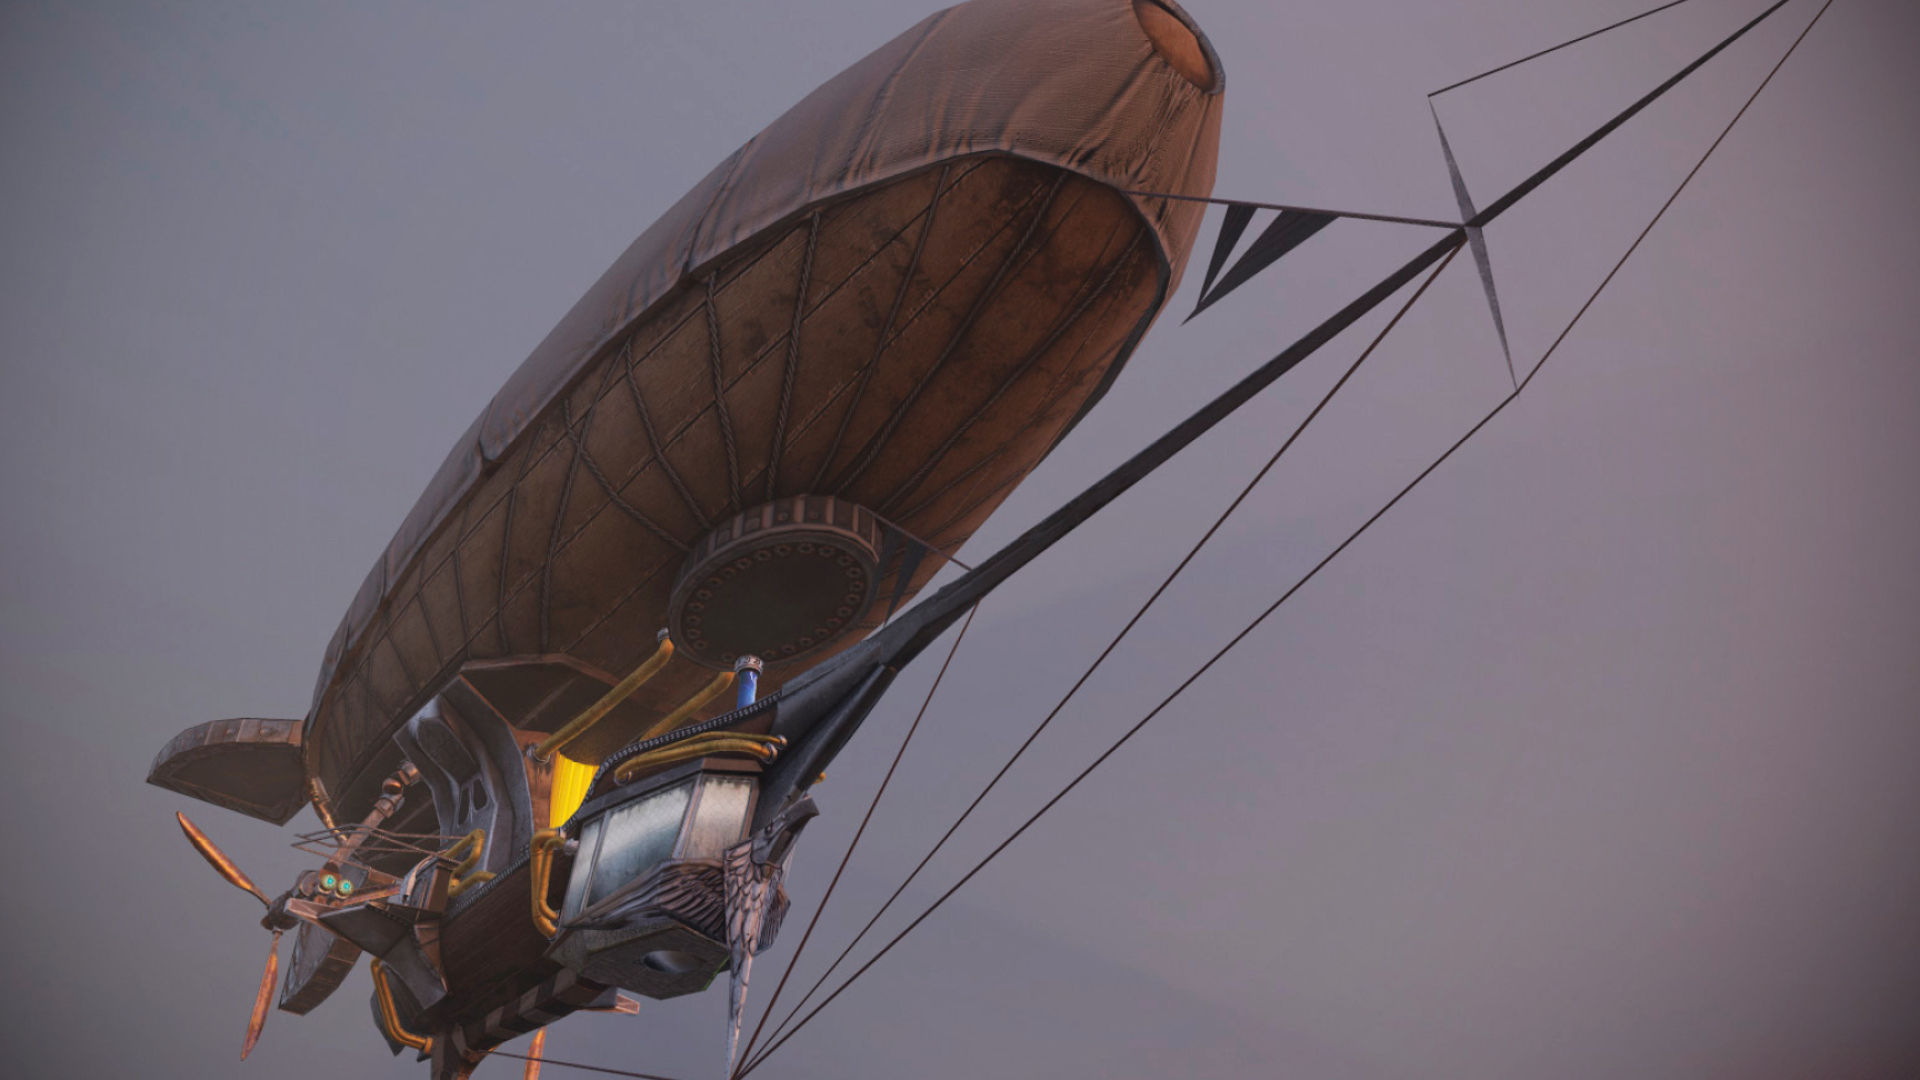 Dirigible: Zeppelin, An airship that is lighter than air and driven by engines. 1920x1080 Full HD Background.